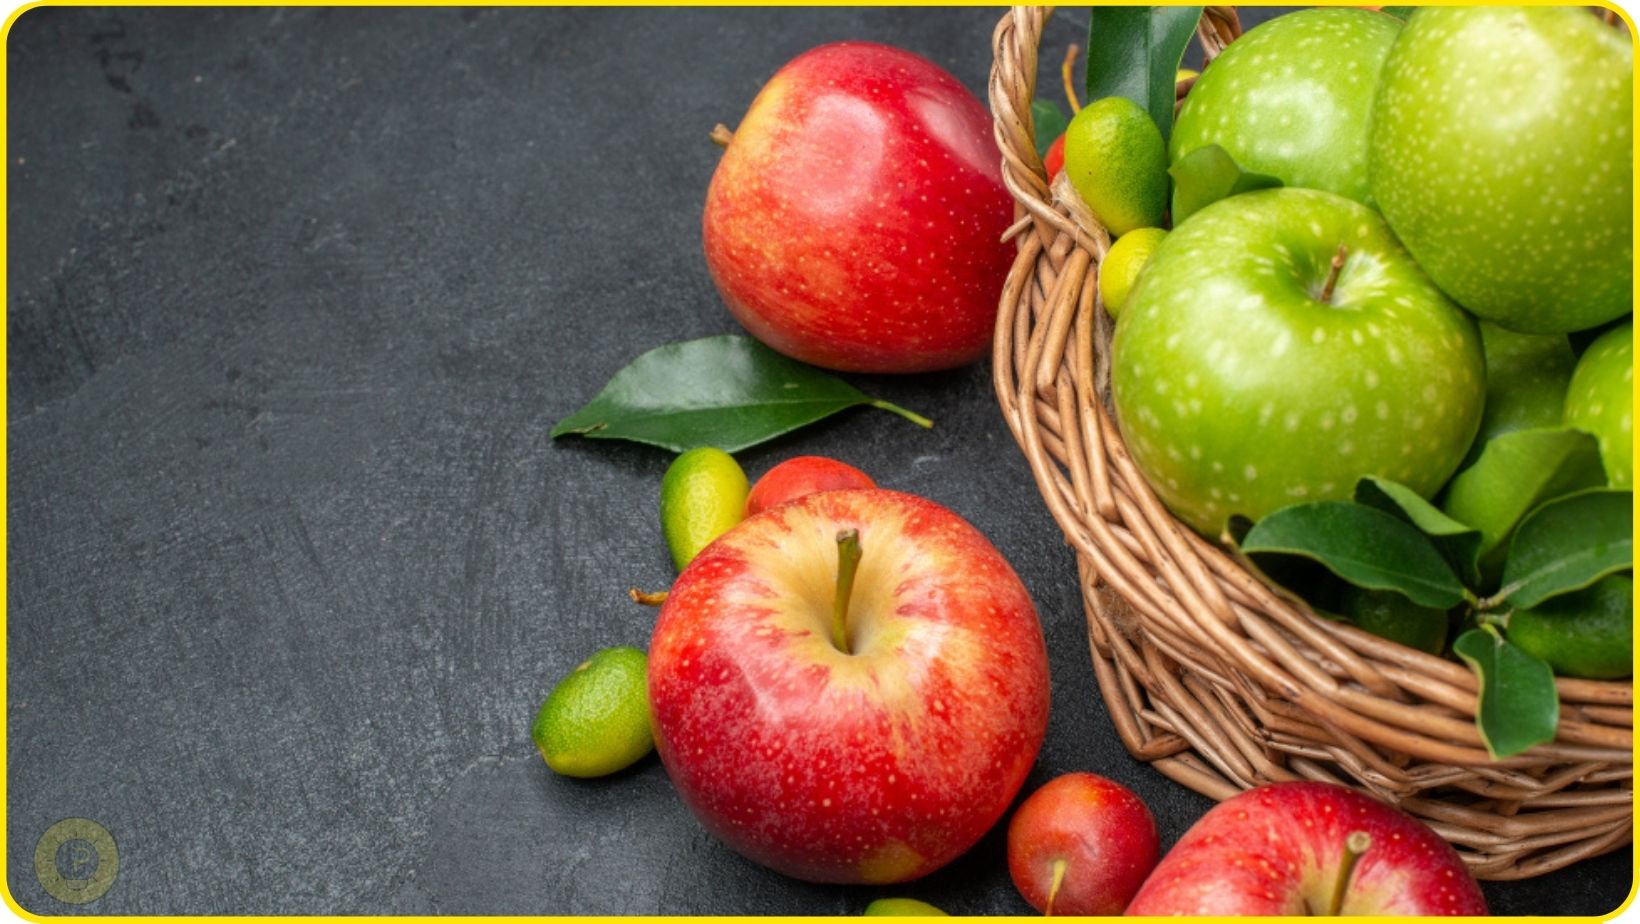 Apples for Cholesterol